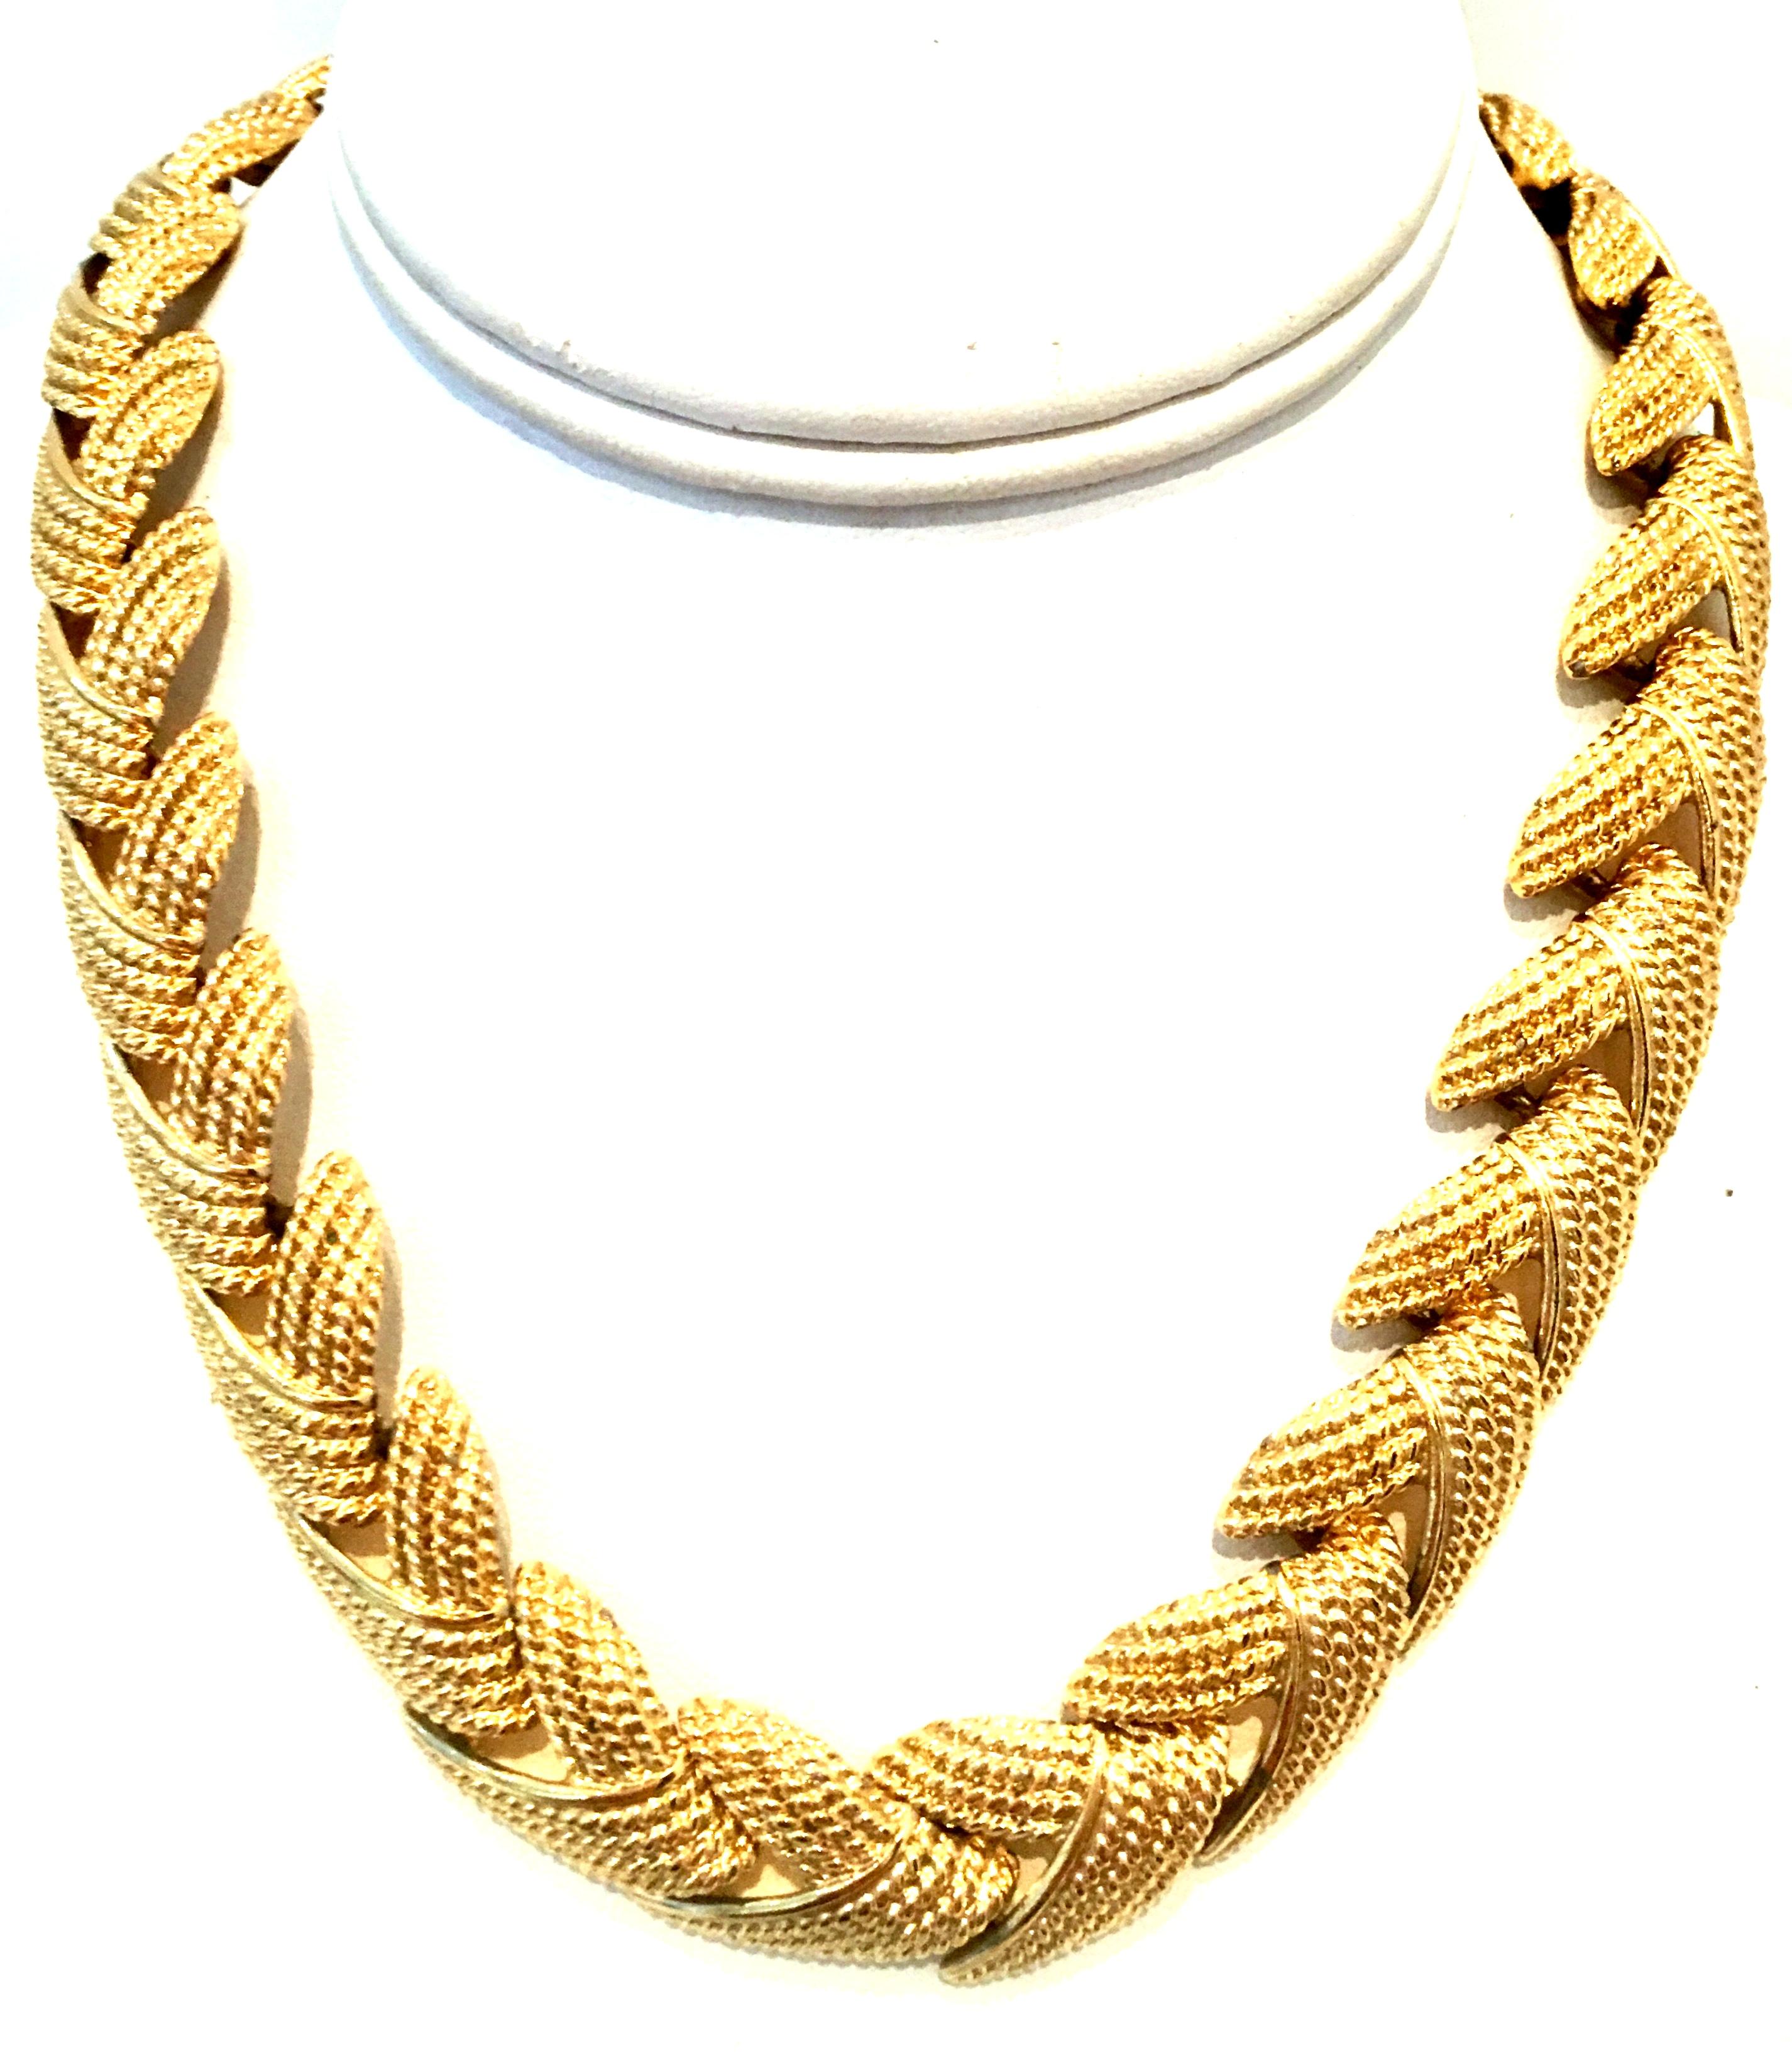 20th Century Gold Plate Choker Style Link Necklace & Bracelet By Napier. This substantially weighted gold plate set of two pieces feature a curved link and textured design. Each piece is signed NAPIER on the fold over box style clasp.
Bracelet